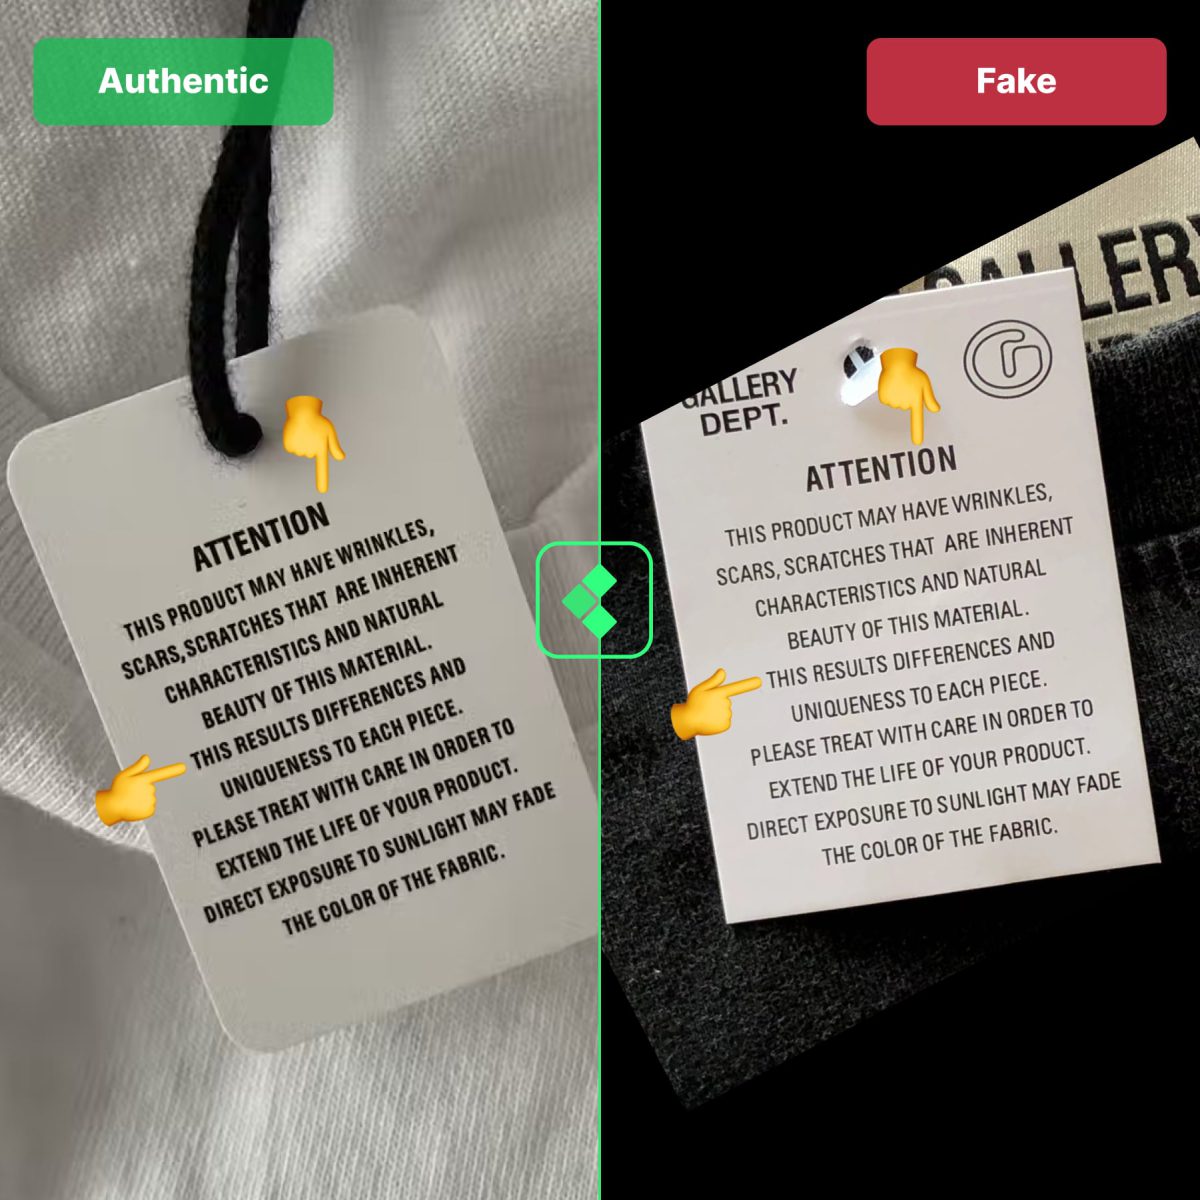 Gallery Dept Fake Vs Real Attention Tag